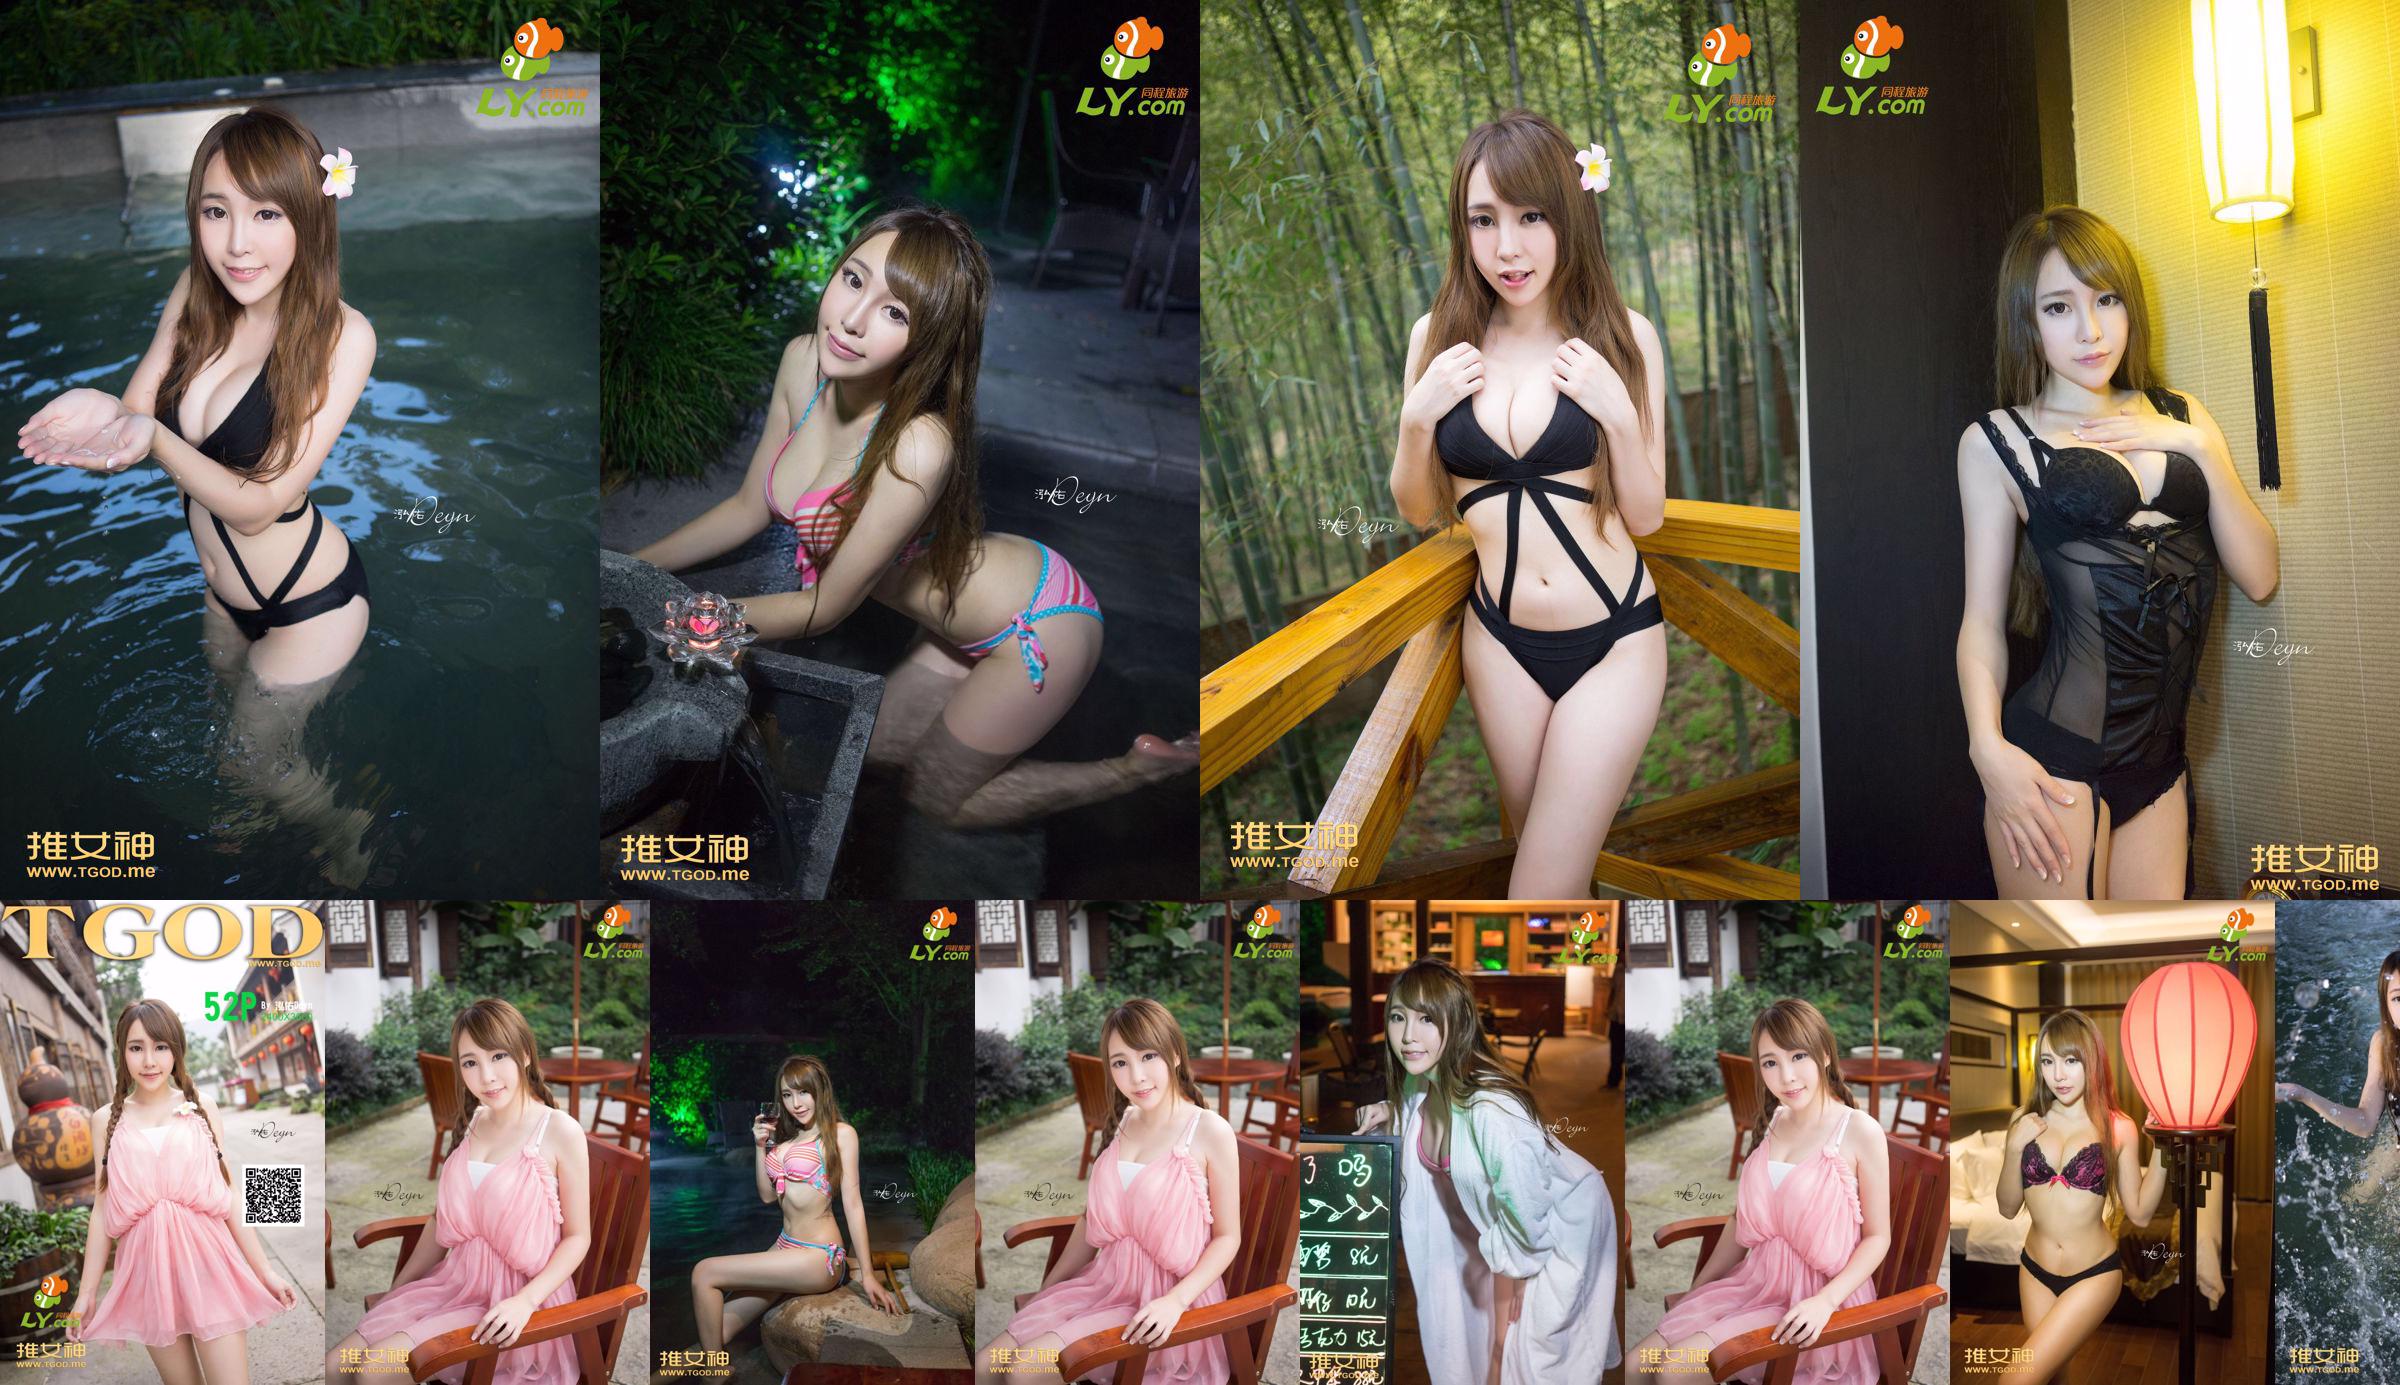 Huang Mengxian "Where Is the Goddess Going Issue 7" [TGOD Push Goddess] No.1804fa Pagina 3